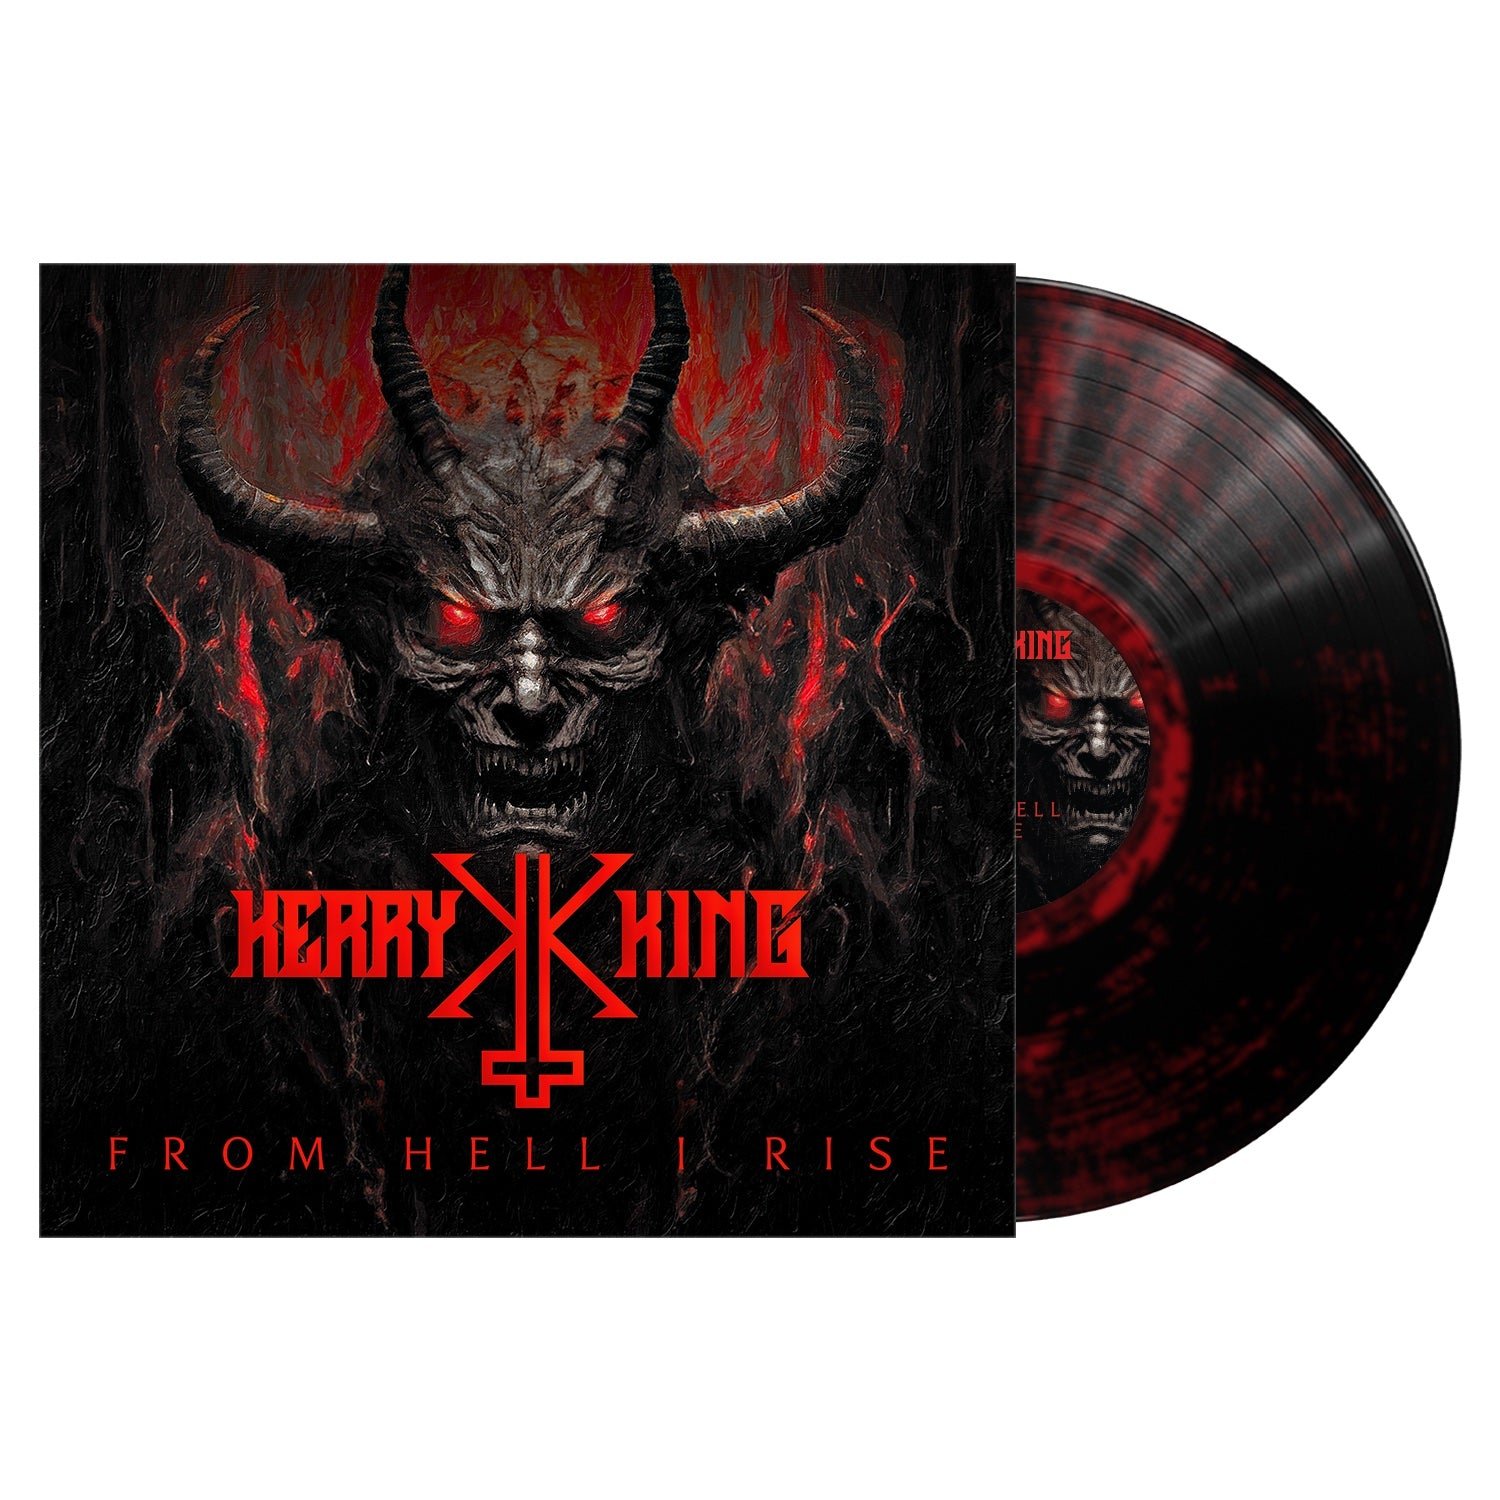 CD Shop - KERRY KING FROM HELL I RISE BLACK RED